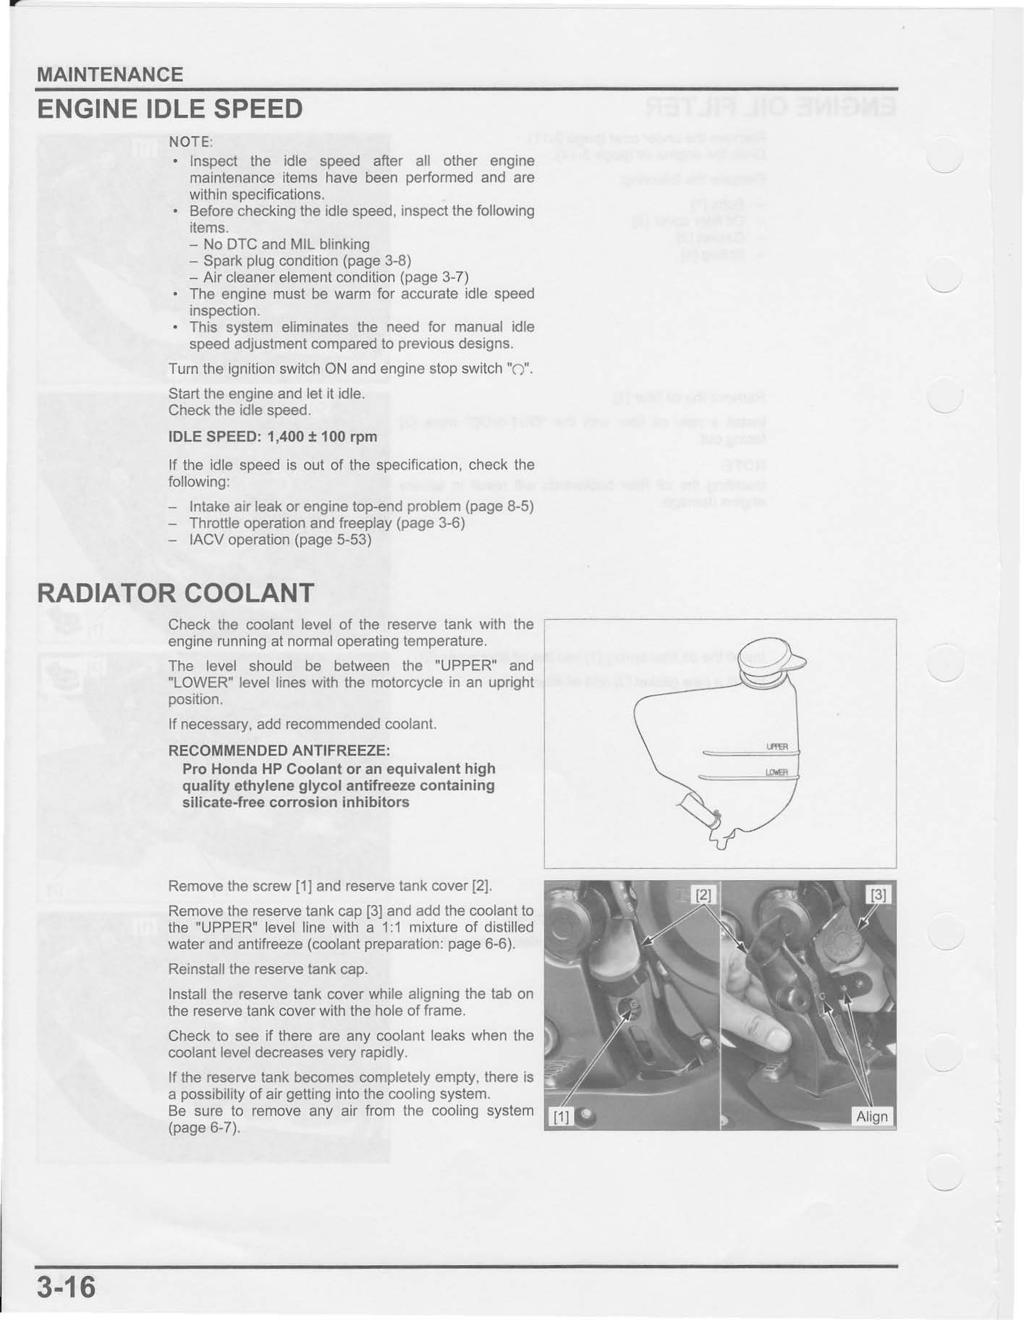 MAINTENANCE ENGINE IDLE SPEED NOTE' Inspect the idle speed after all other engine maintenance items have been performed and are within specifications.